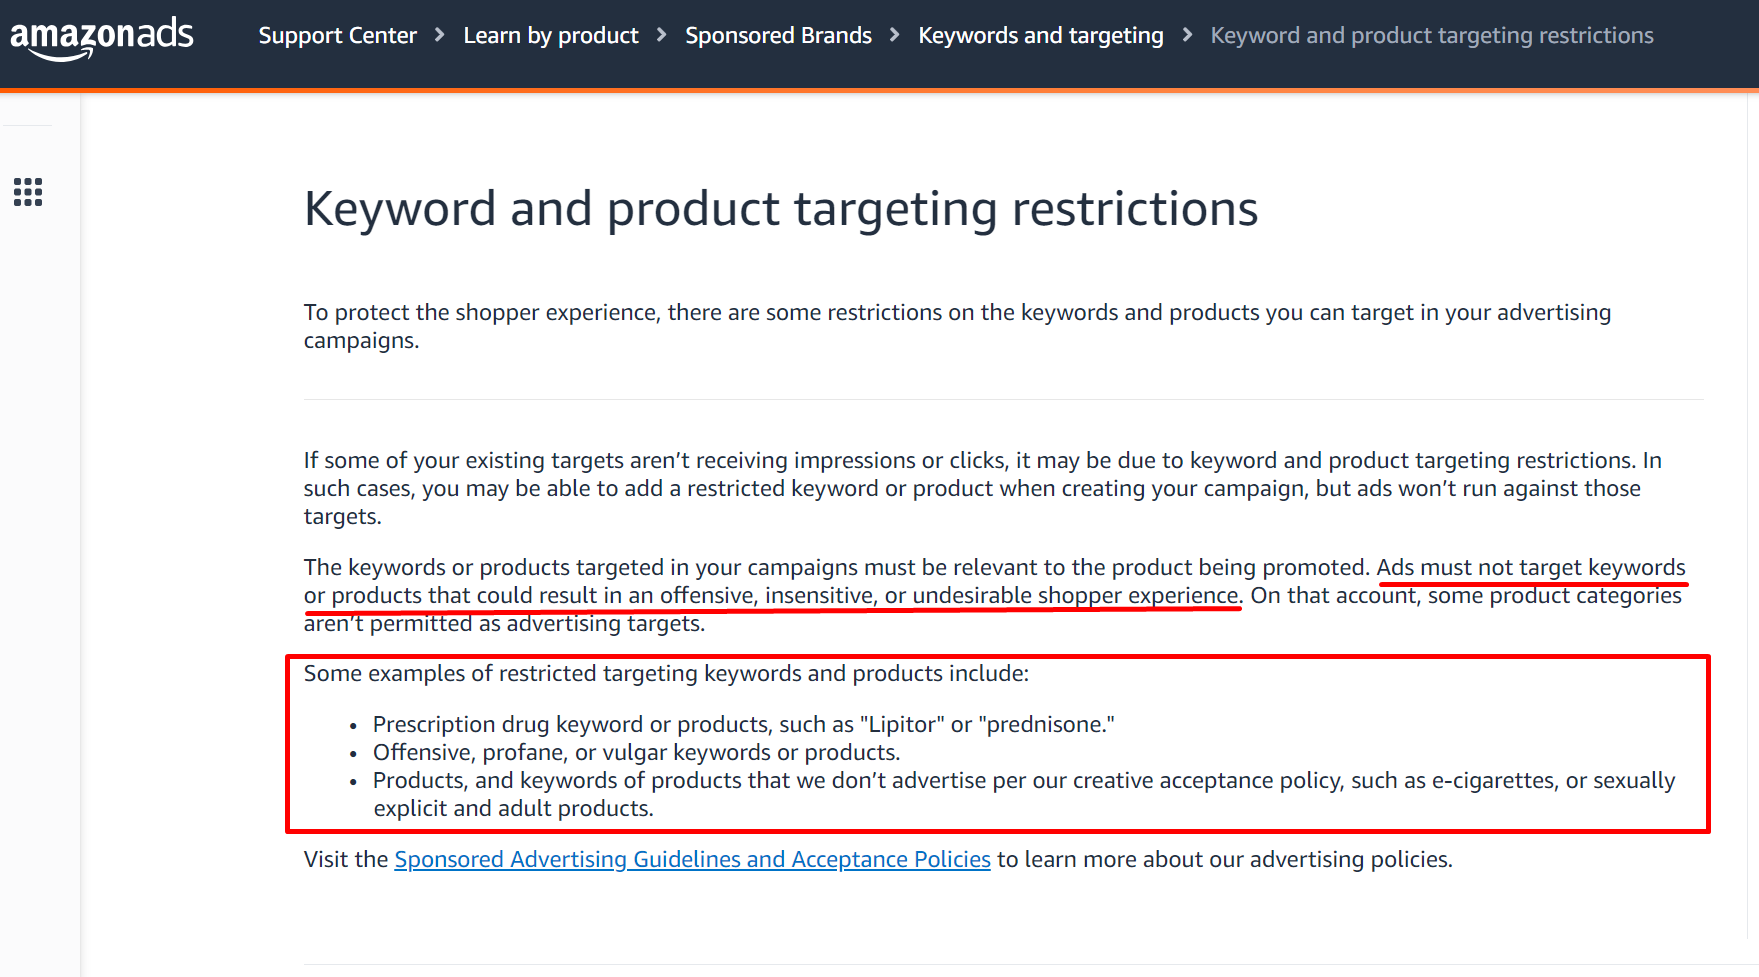 Amazon content guidelines re: keyword restrictions